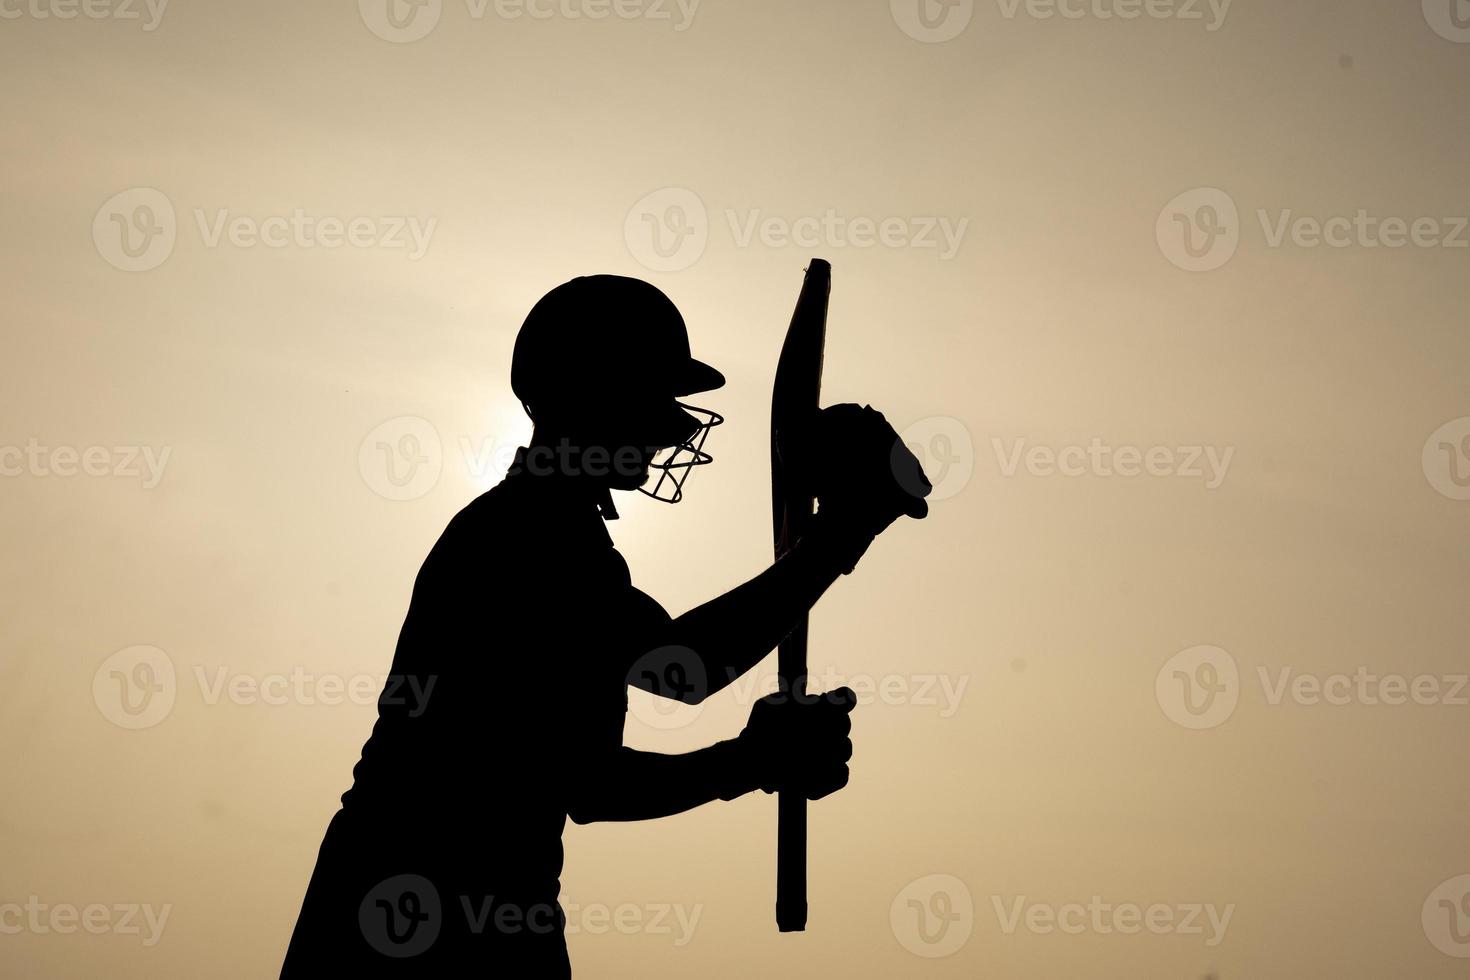 Silhouette of a cricketer celebrating after getting a century in the cricket match. Indian cricket players and sports concept. photo